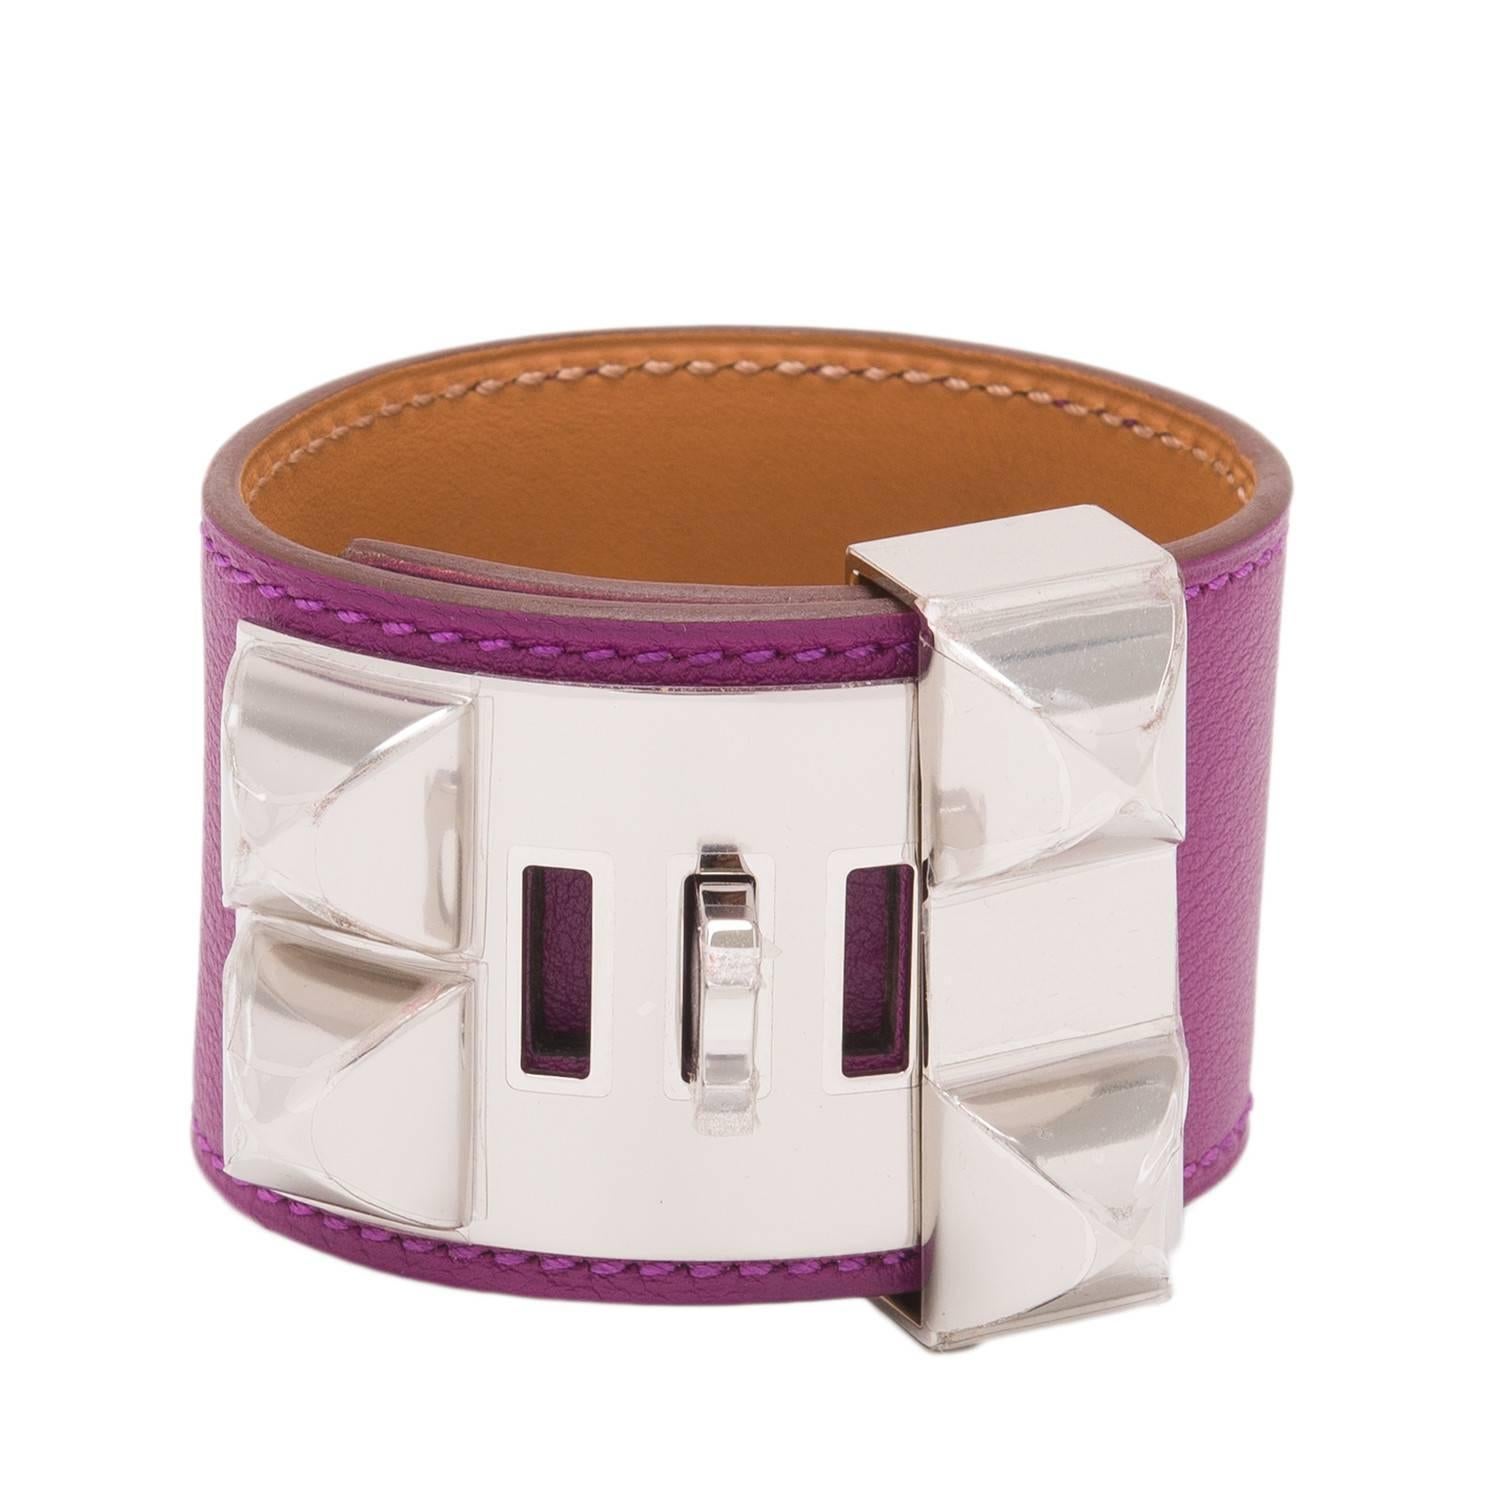 Hermes Anemone Swift Collier De Chien (CDC) Small Bracelet In New Condition For Sale In New York, NY